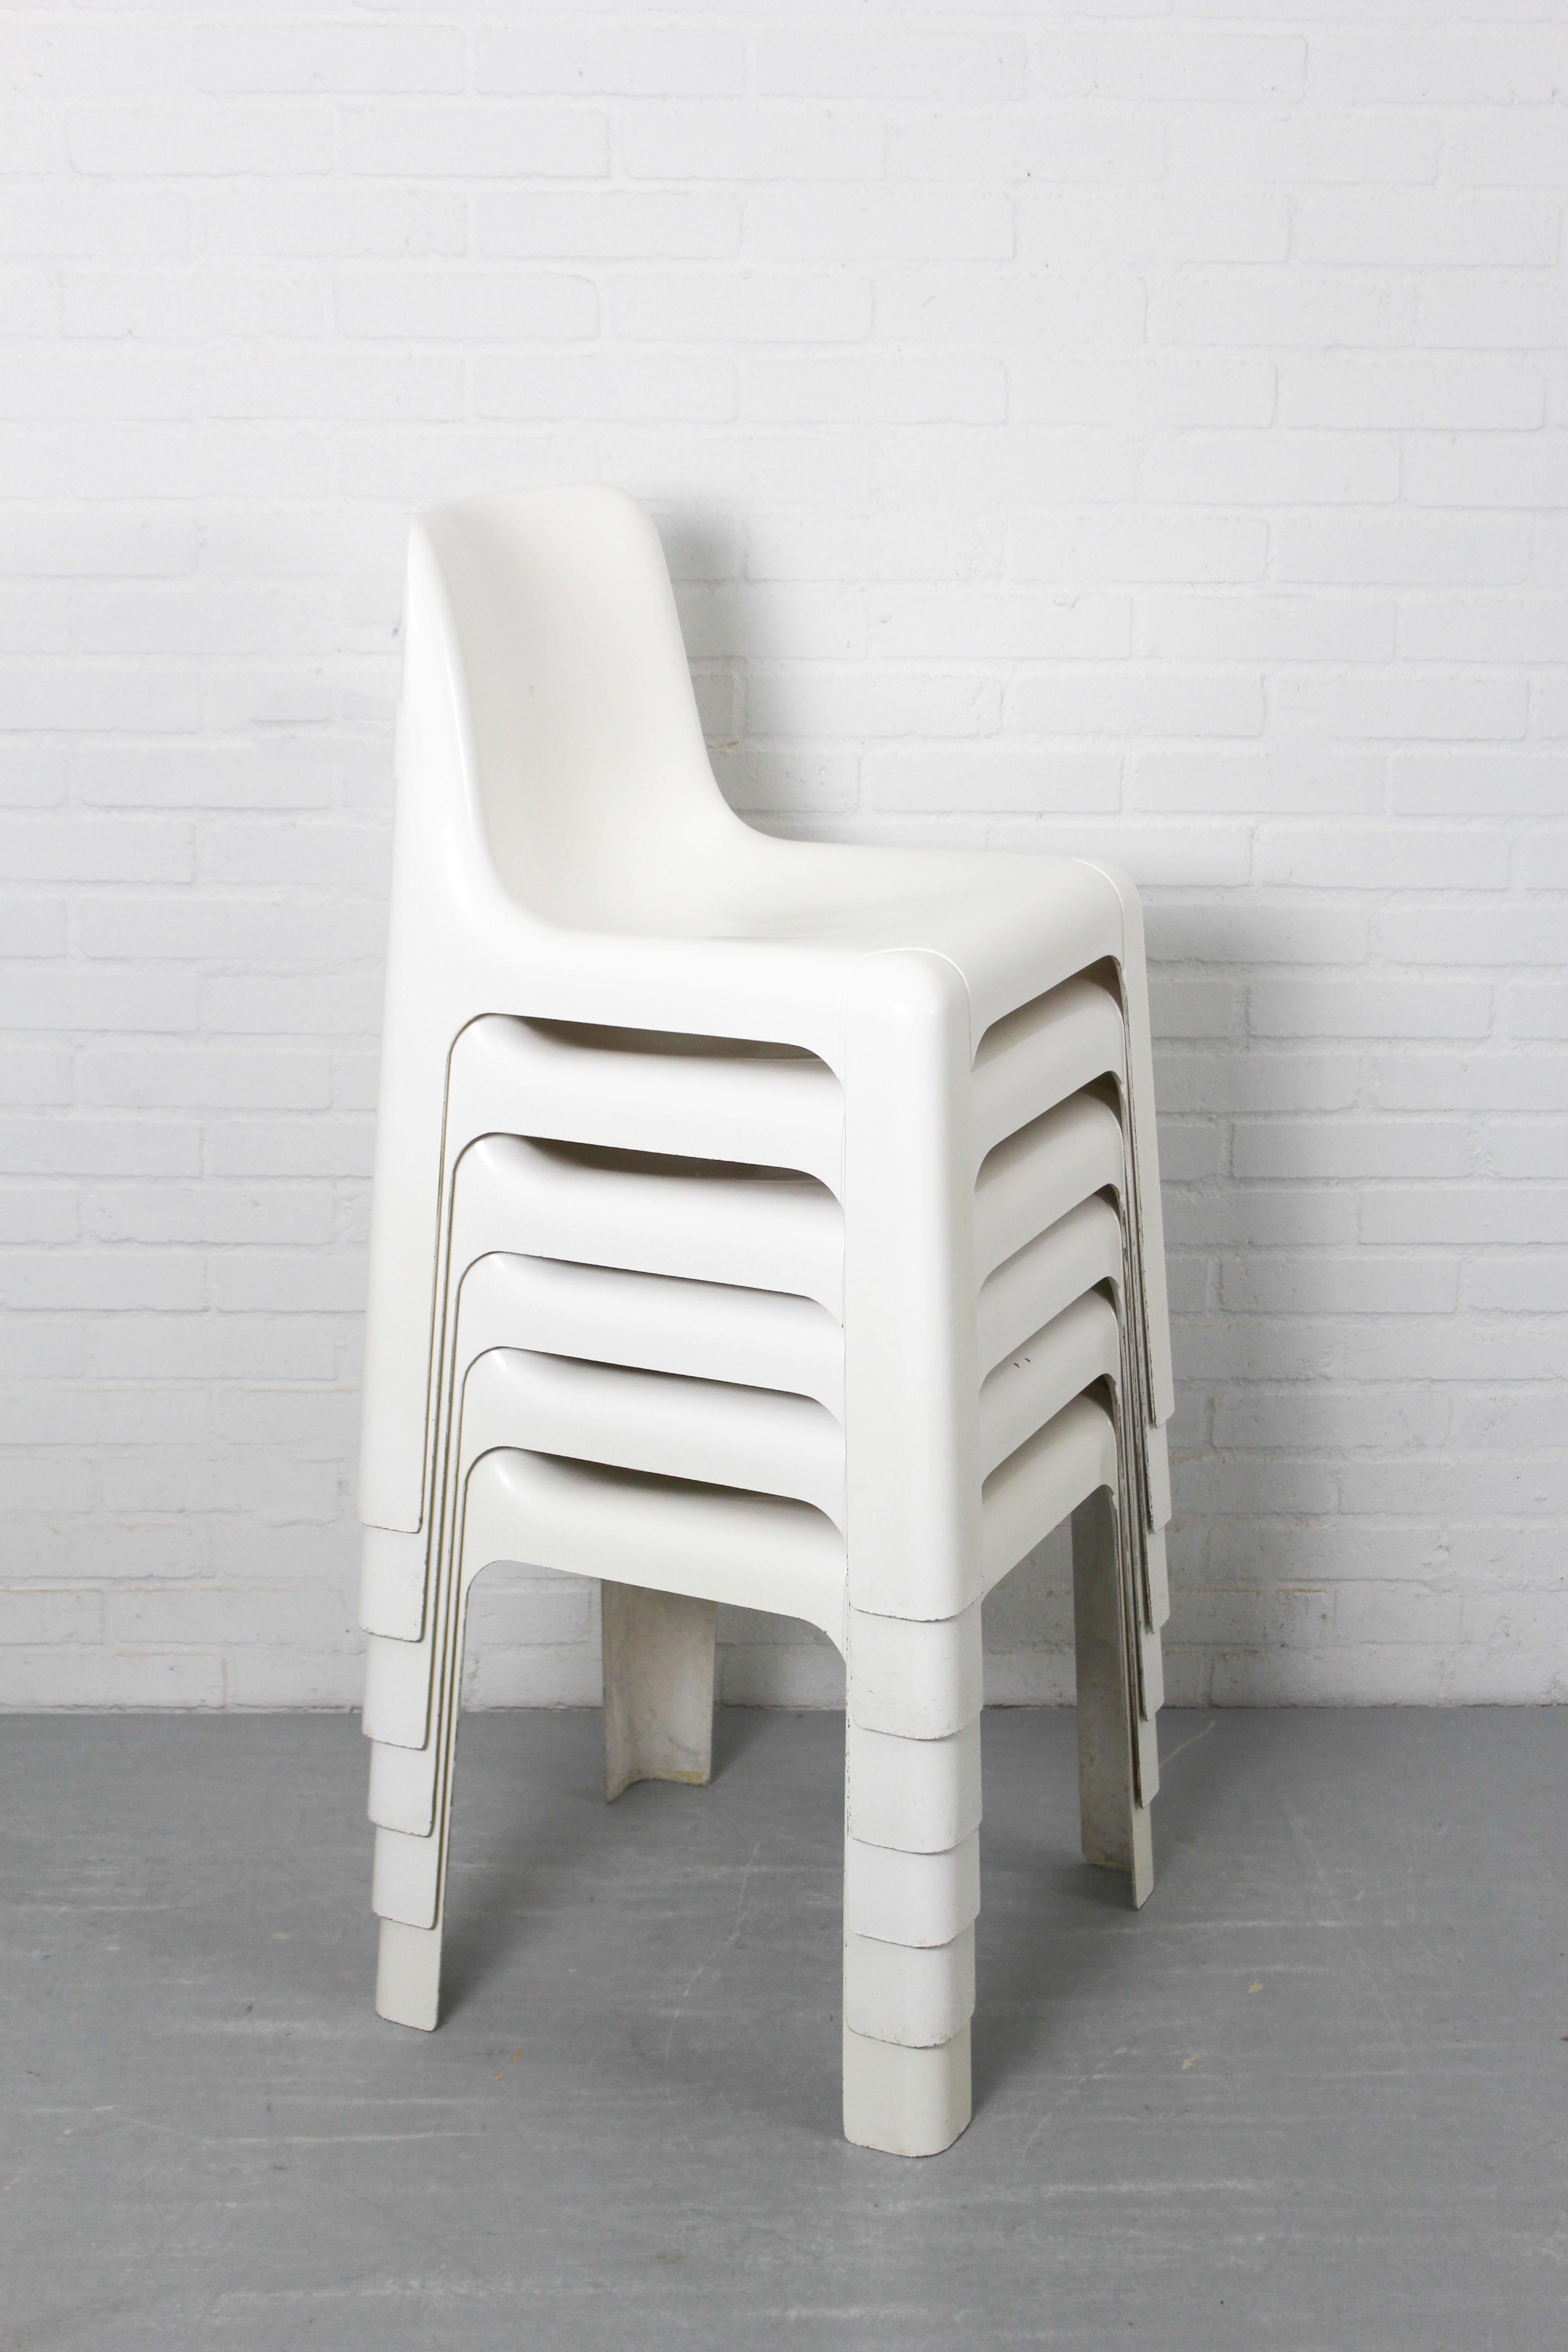 6 OZOO 700 Fiberglass Dining Chairs by Marc Berthier for Roche Bobois, 1970s For Sale 10